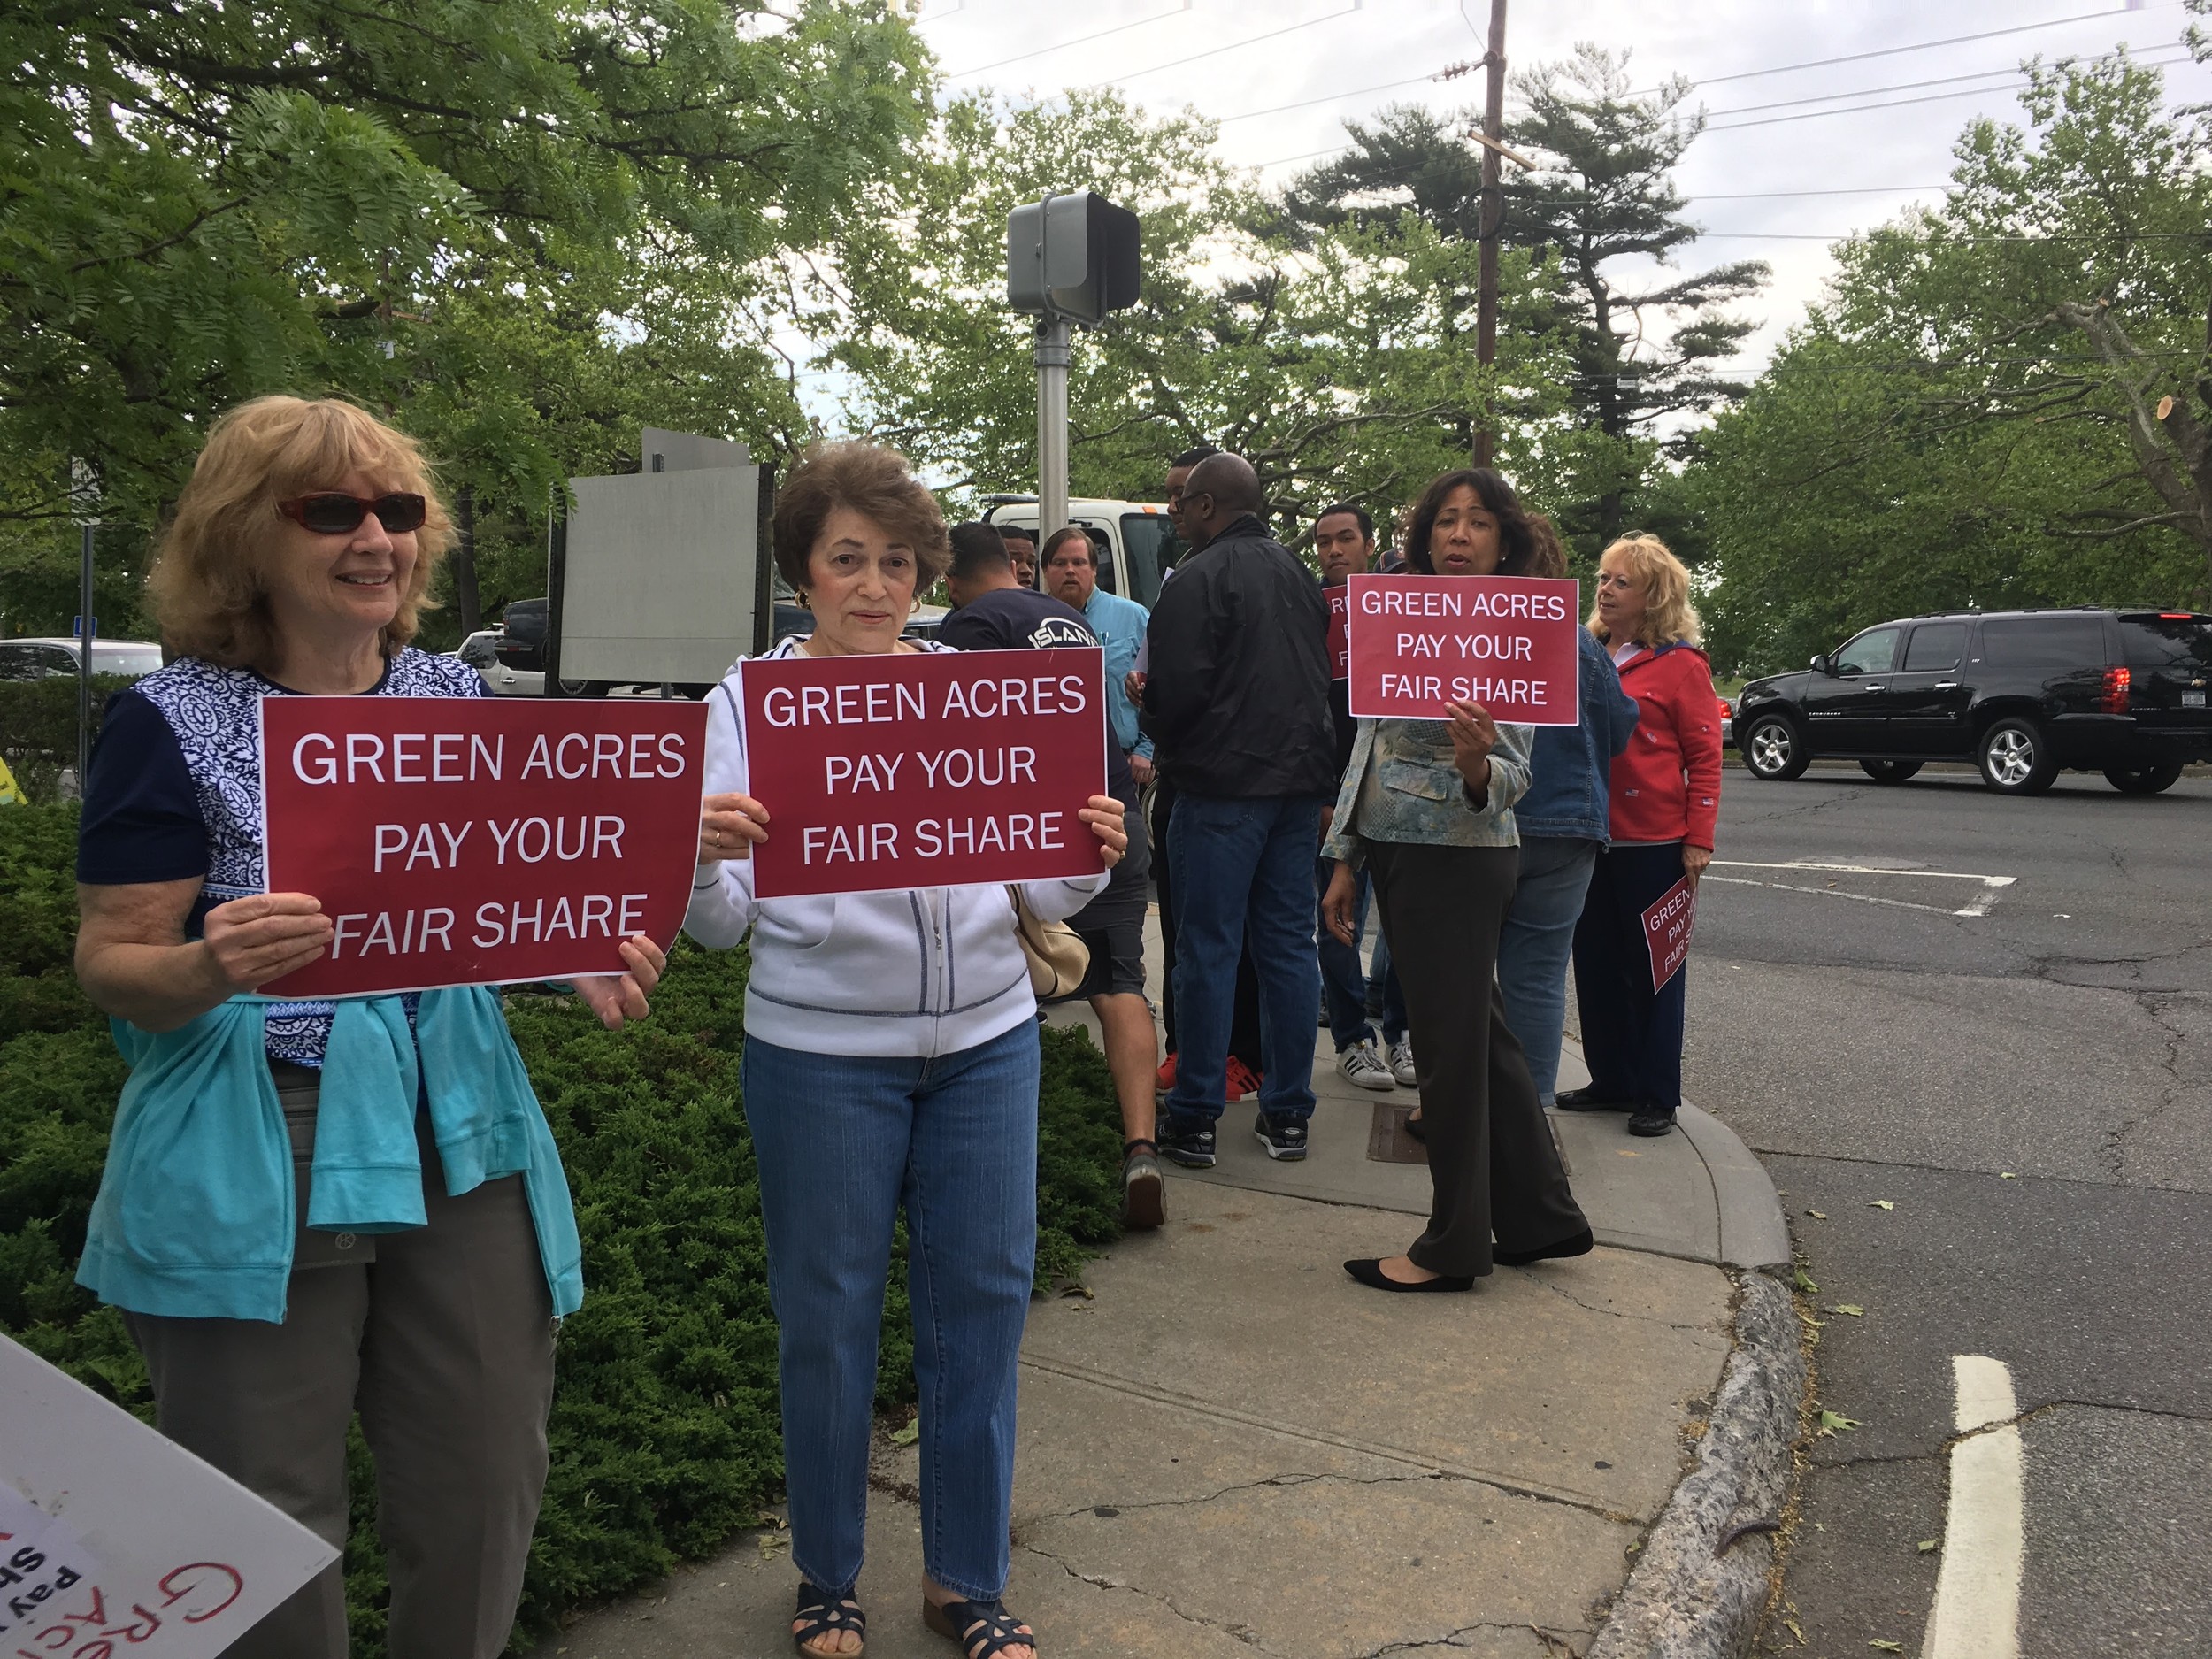 Valley Streamers attended County Legislator Carrie Solage's rally last Saturday, at which he advocated returning the Green Acres Mall to the tax rolls.